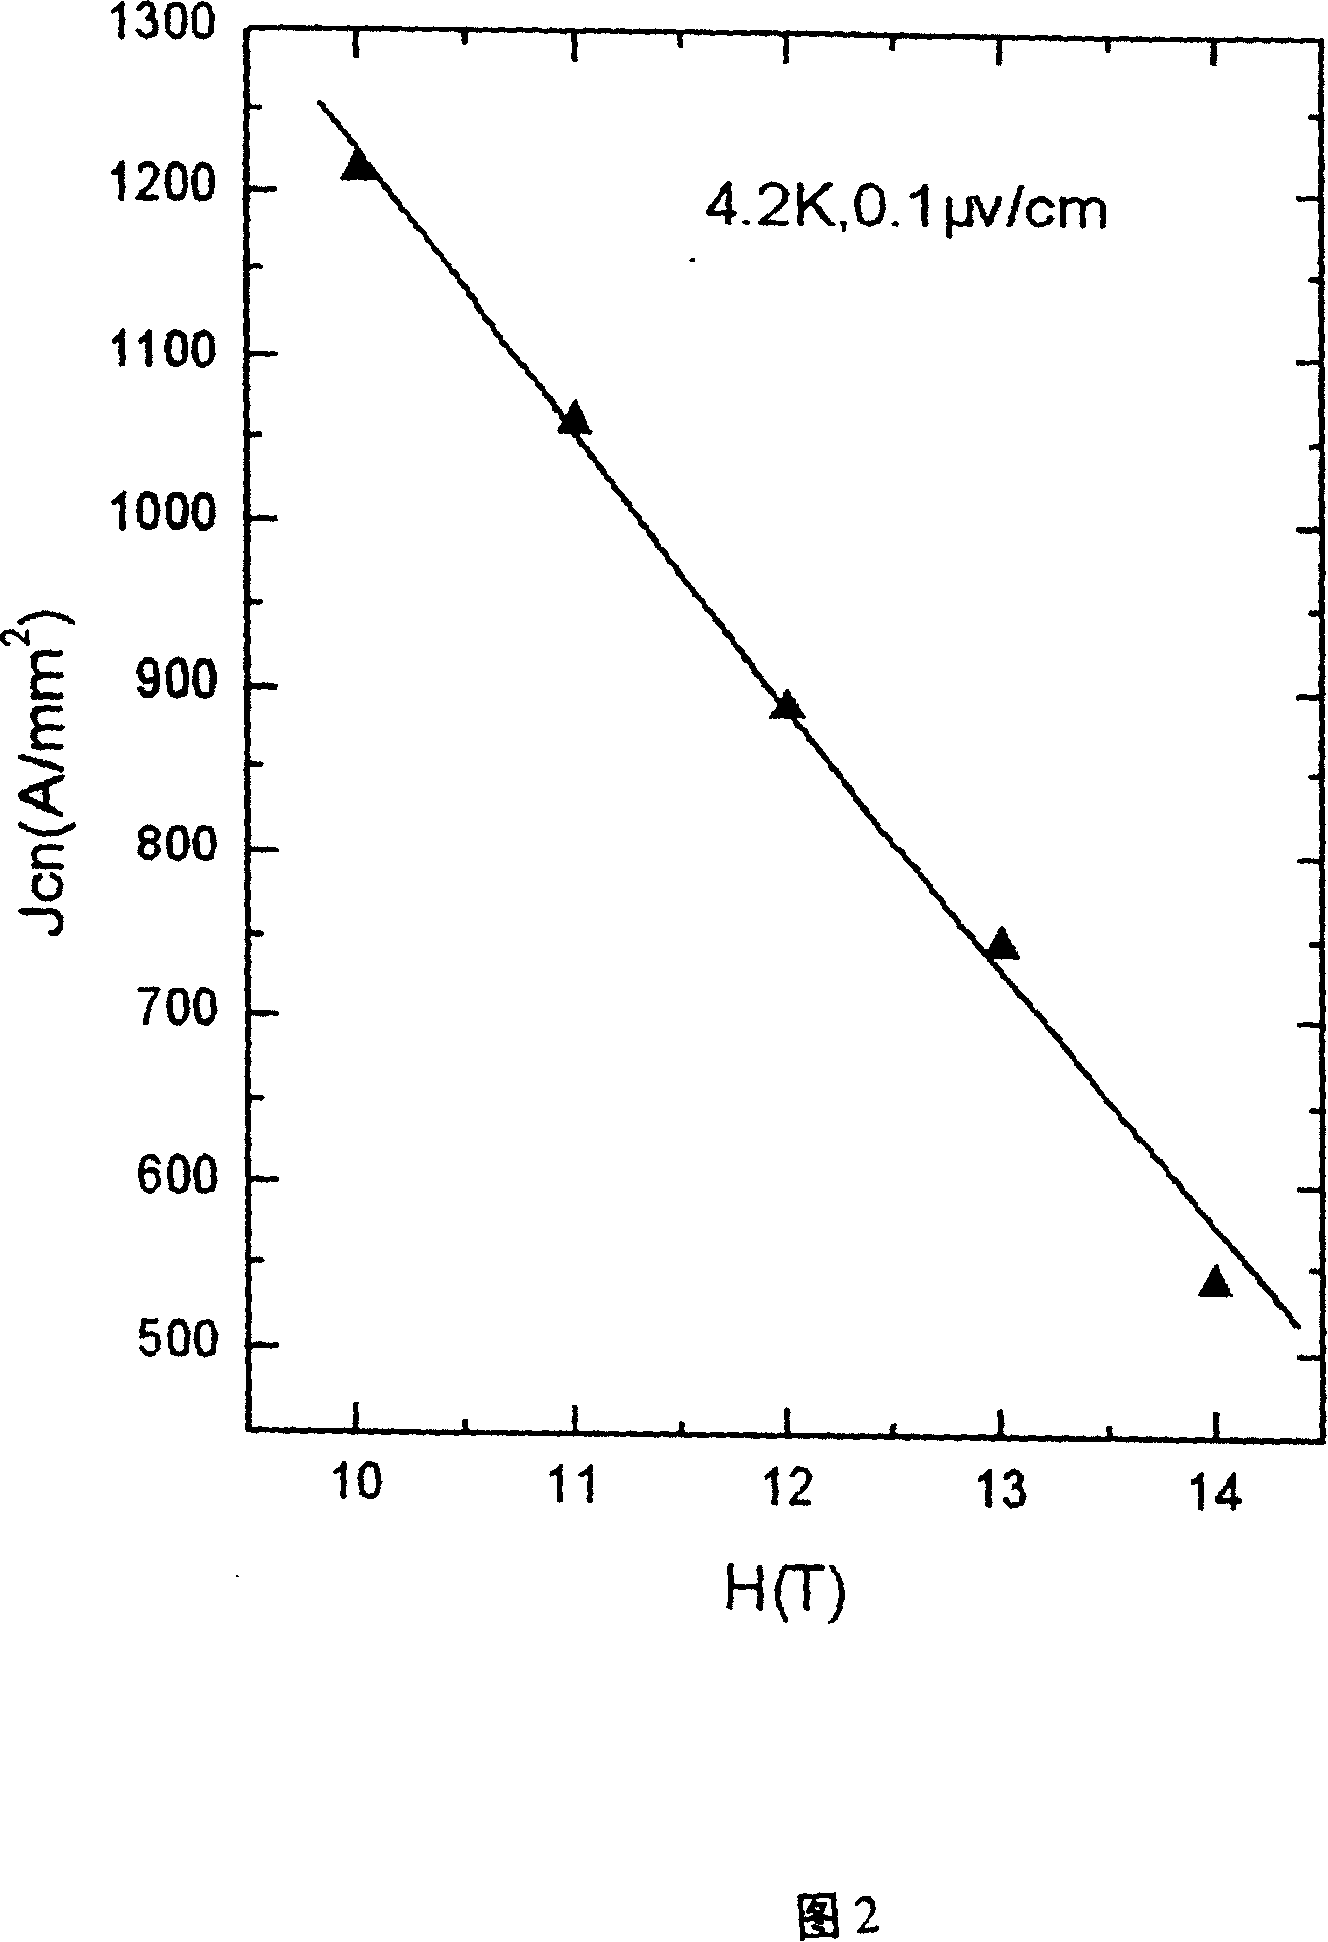 Ti-containing Sn-based alloy and its smelting preparation method